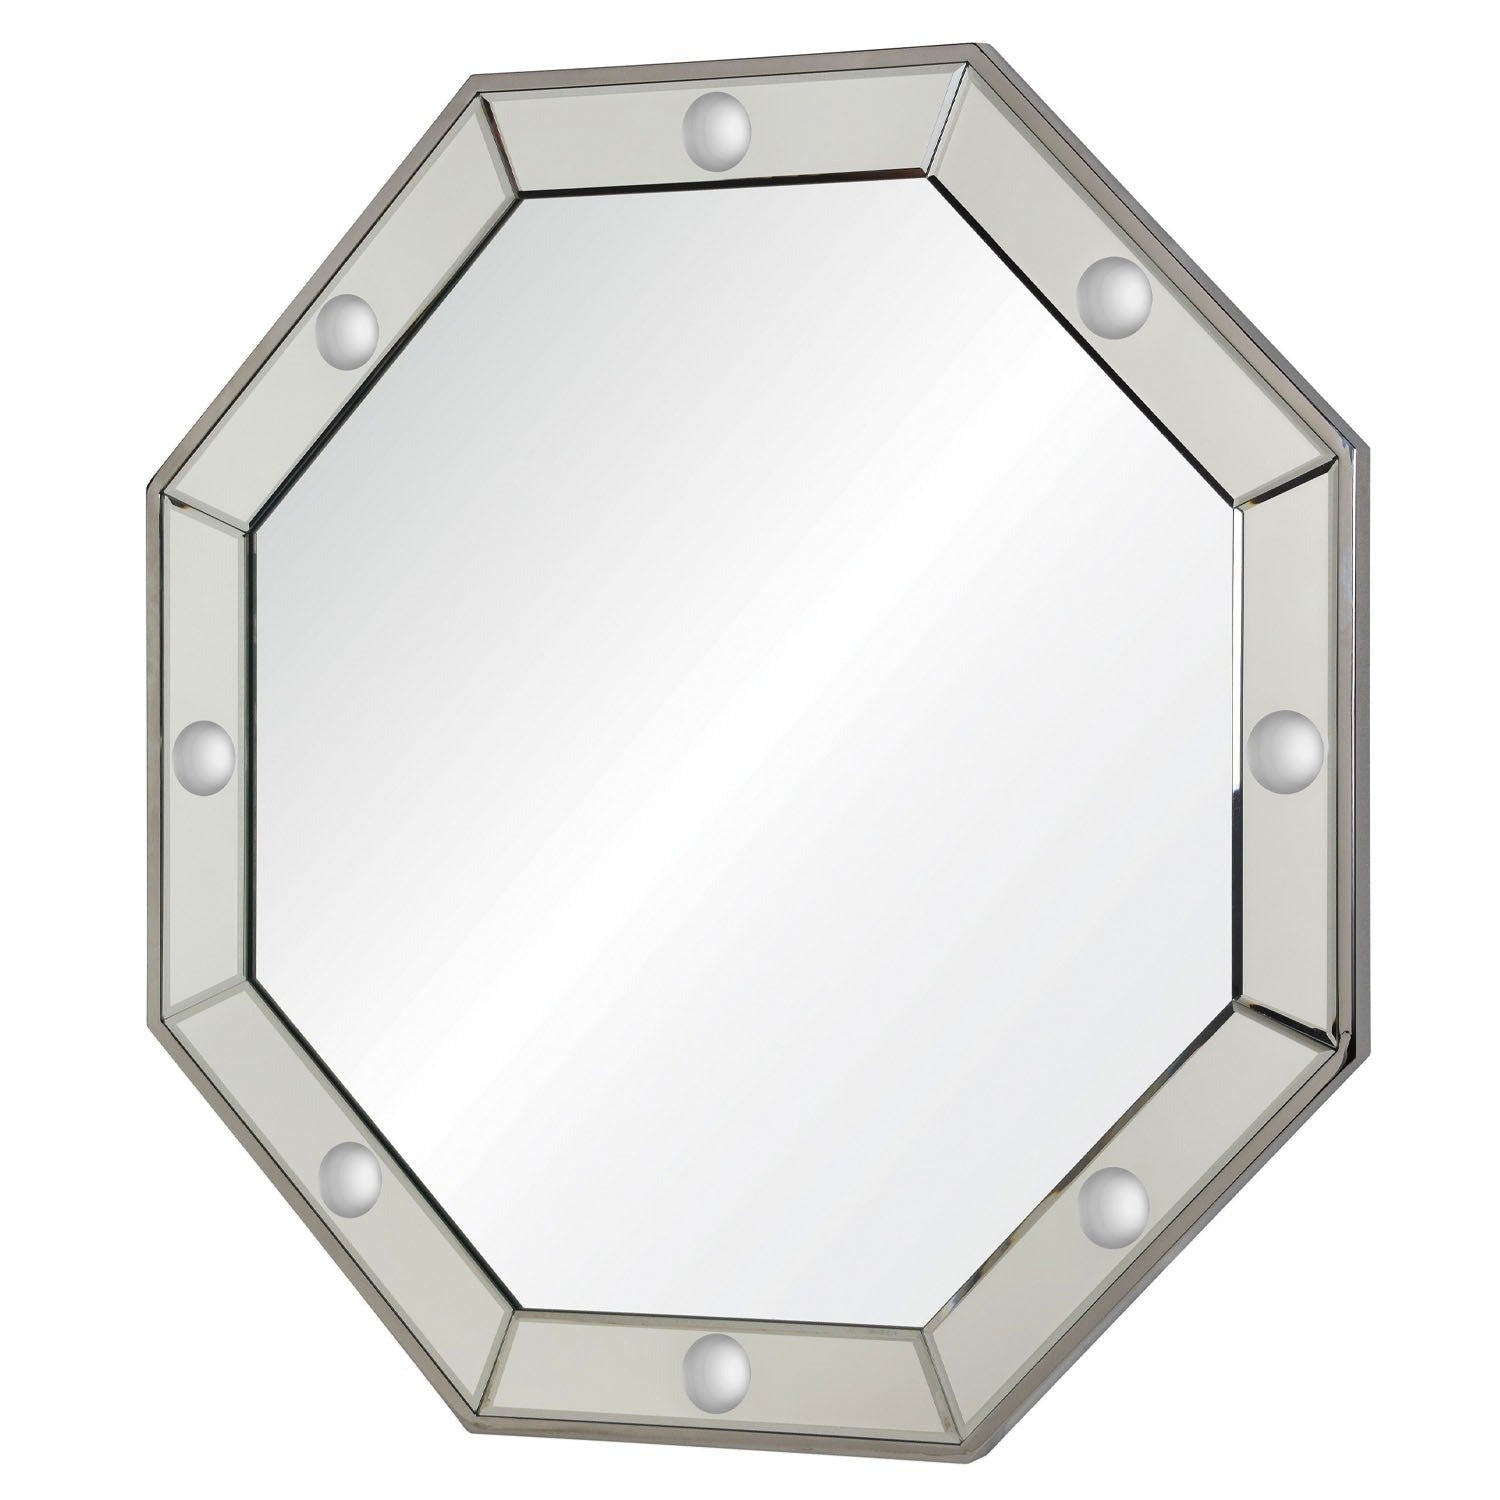 mirror home octagonal polished stainless steel mirror side view